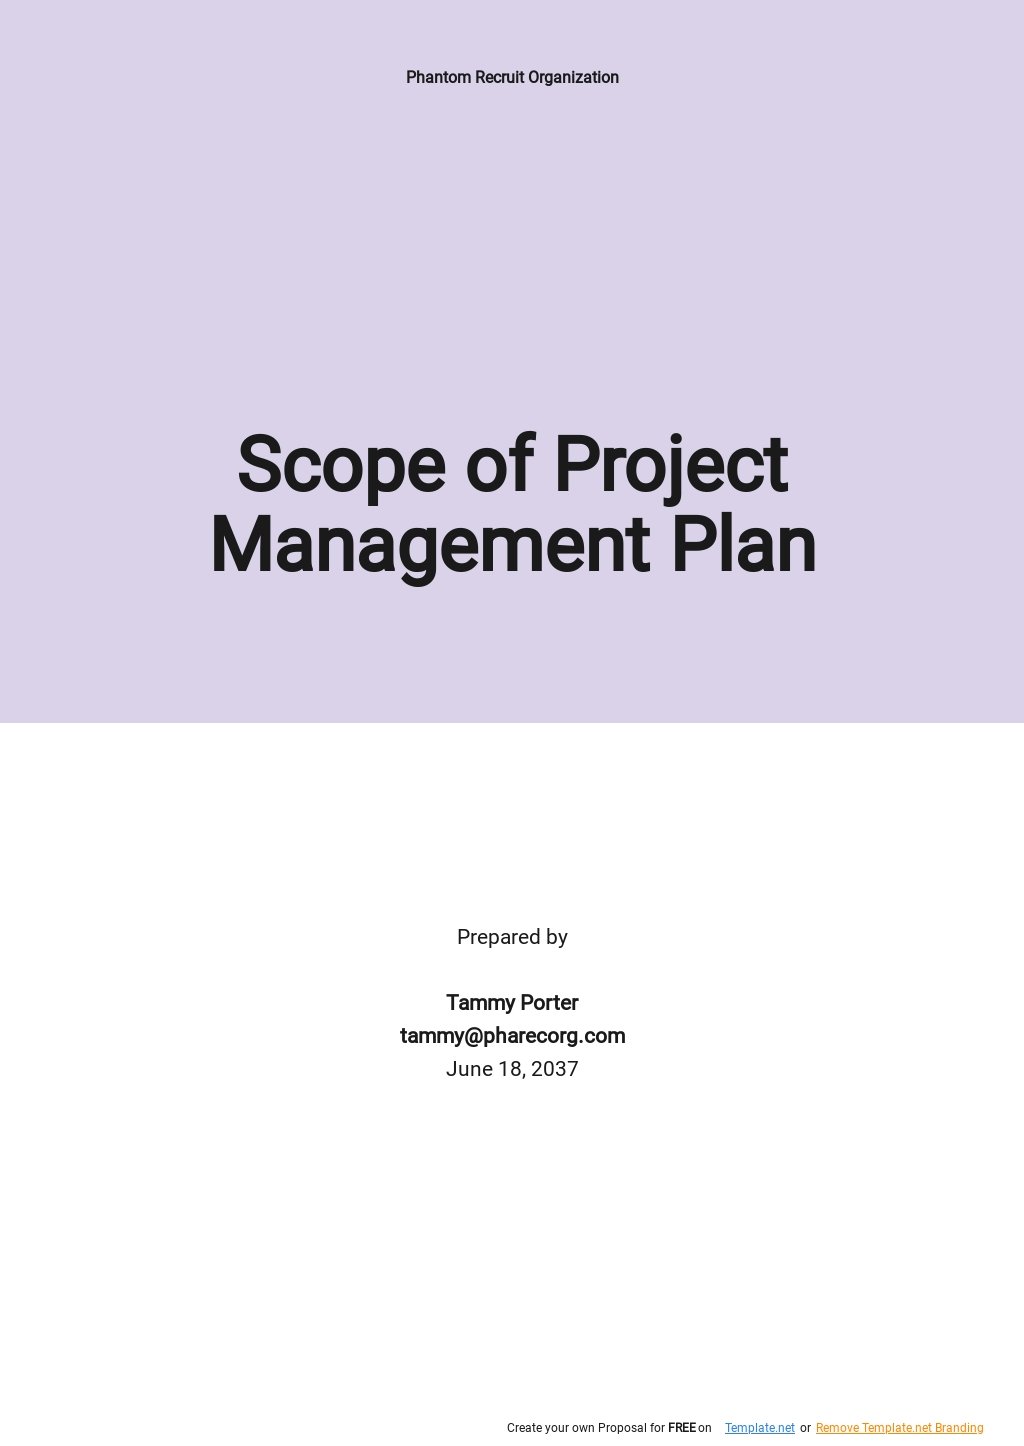 Scope of Project Management Plan Template